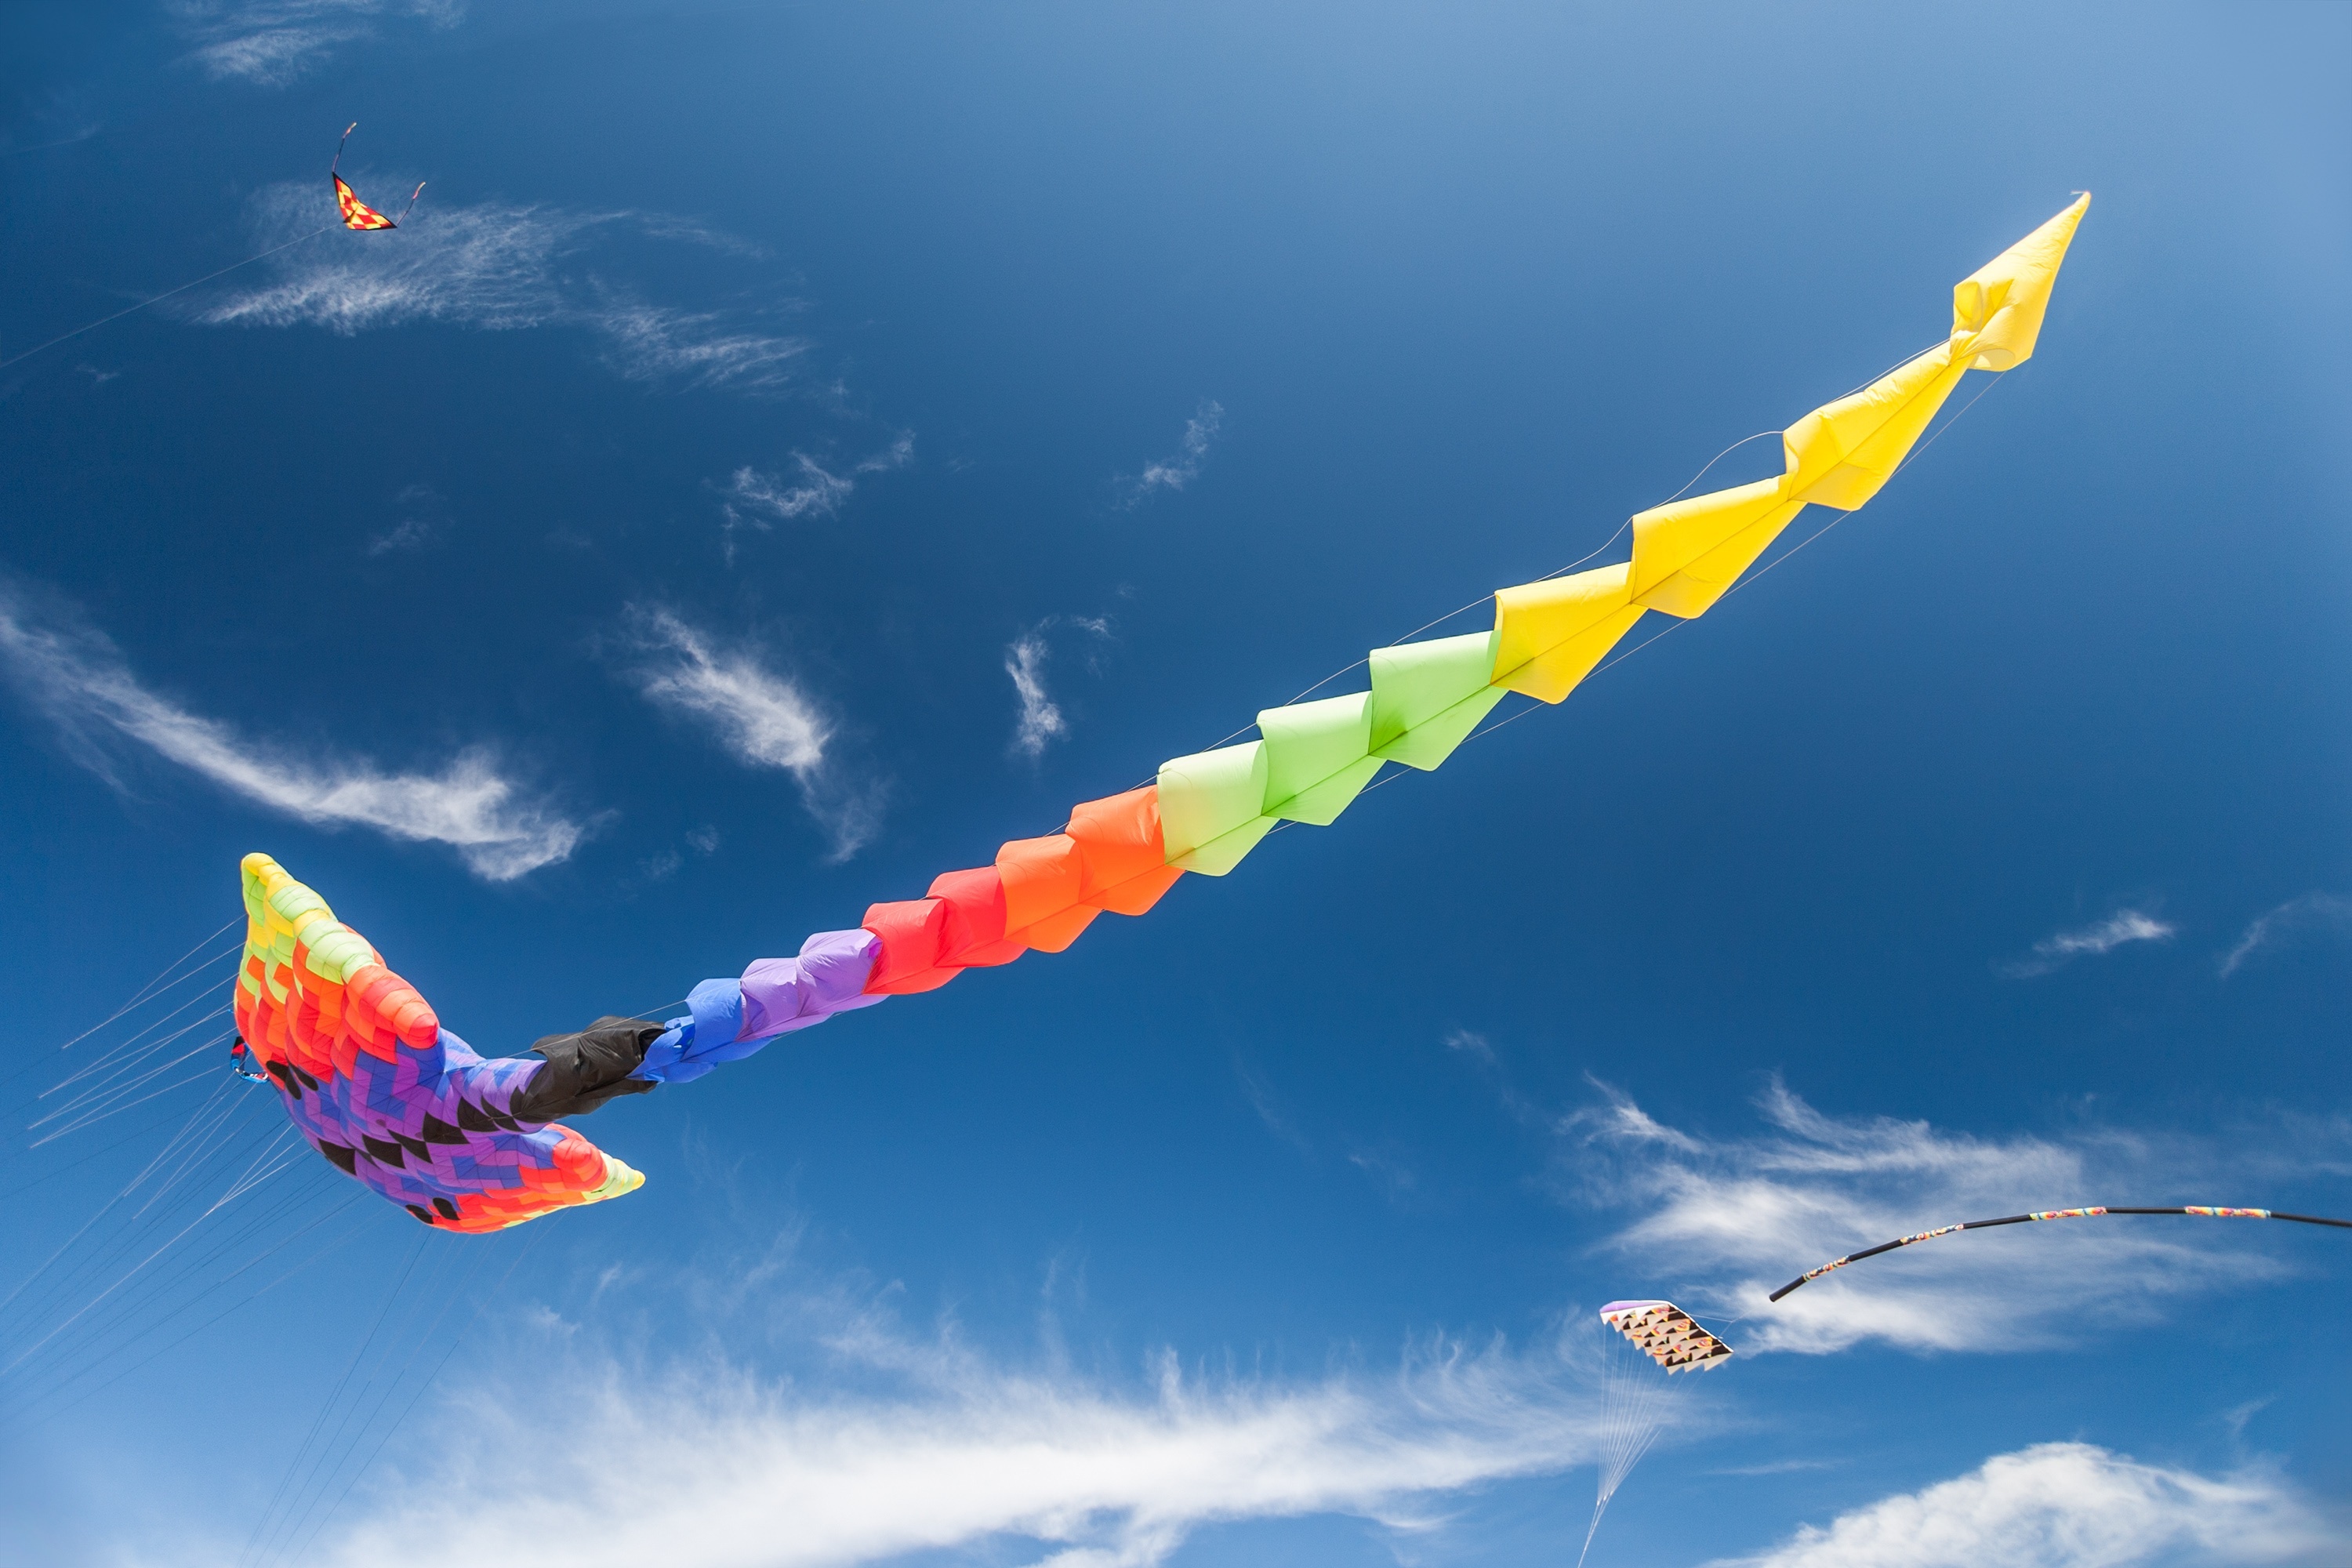 Kite Flying: Big colorful rainbow kite with a tail, 400 feet of line, Kite competitions. 3000x2000 HD Wallpaper.